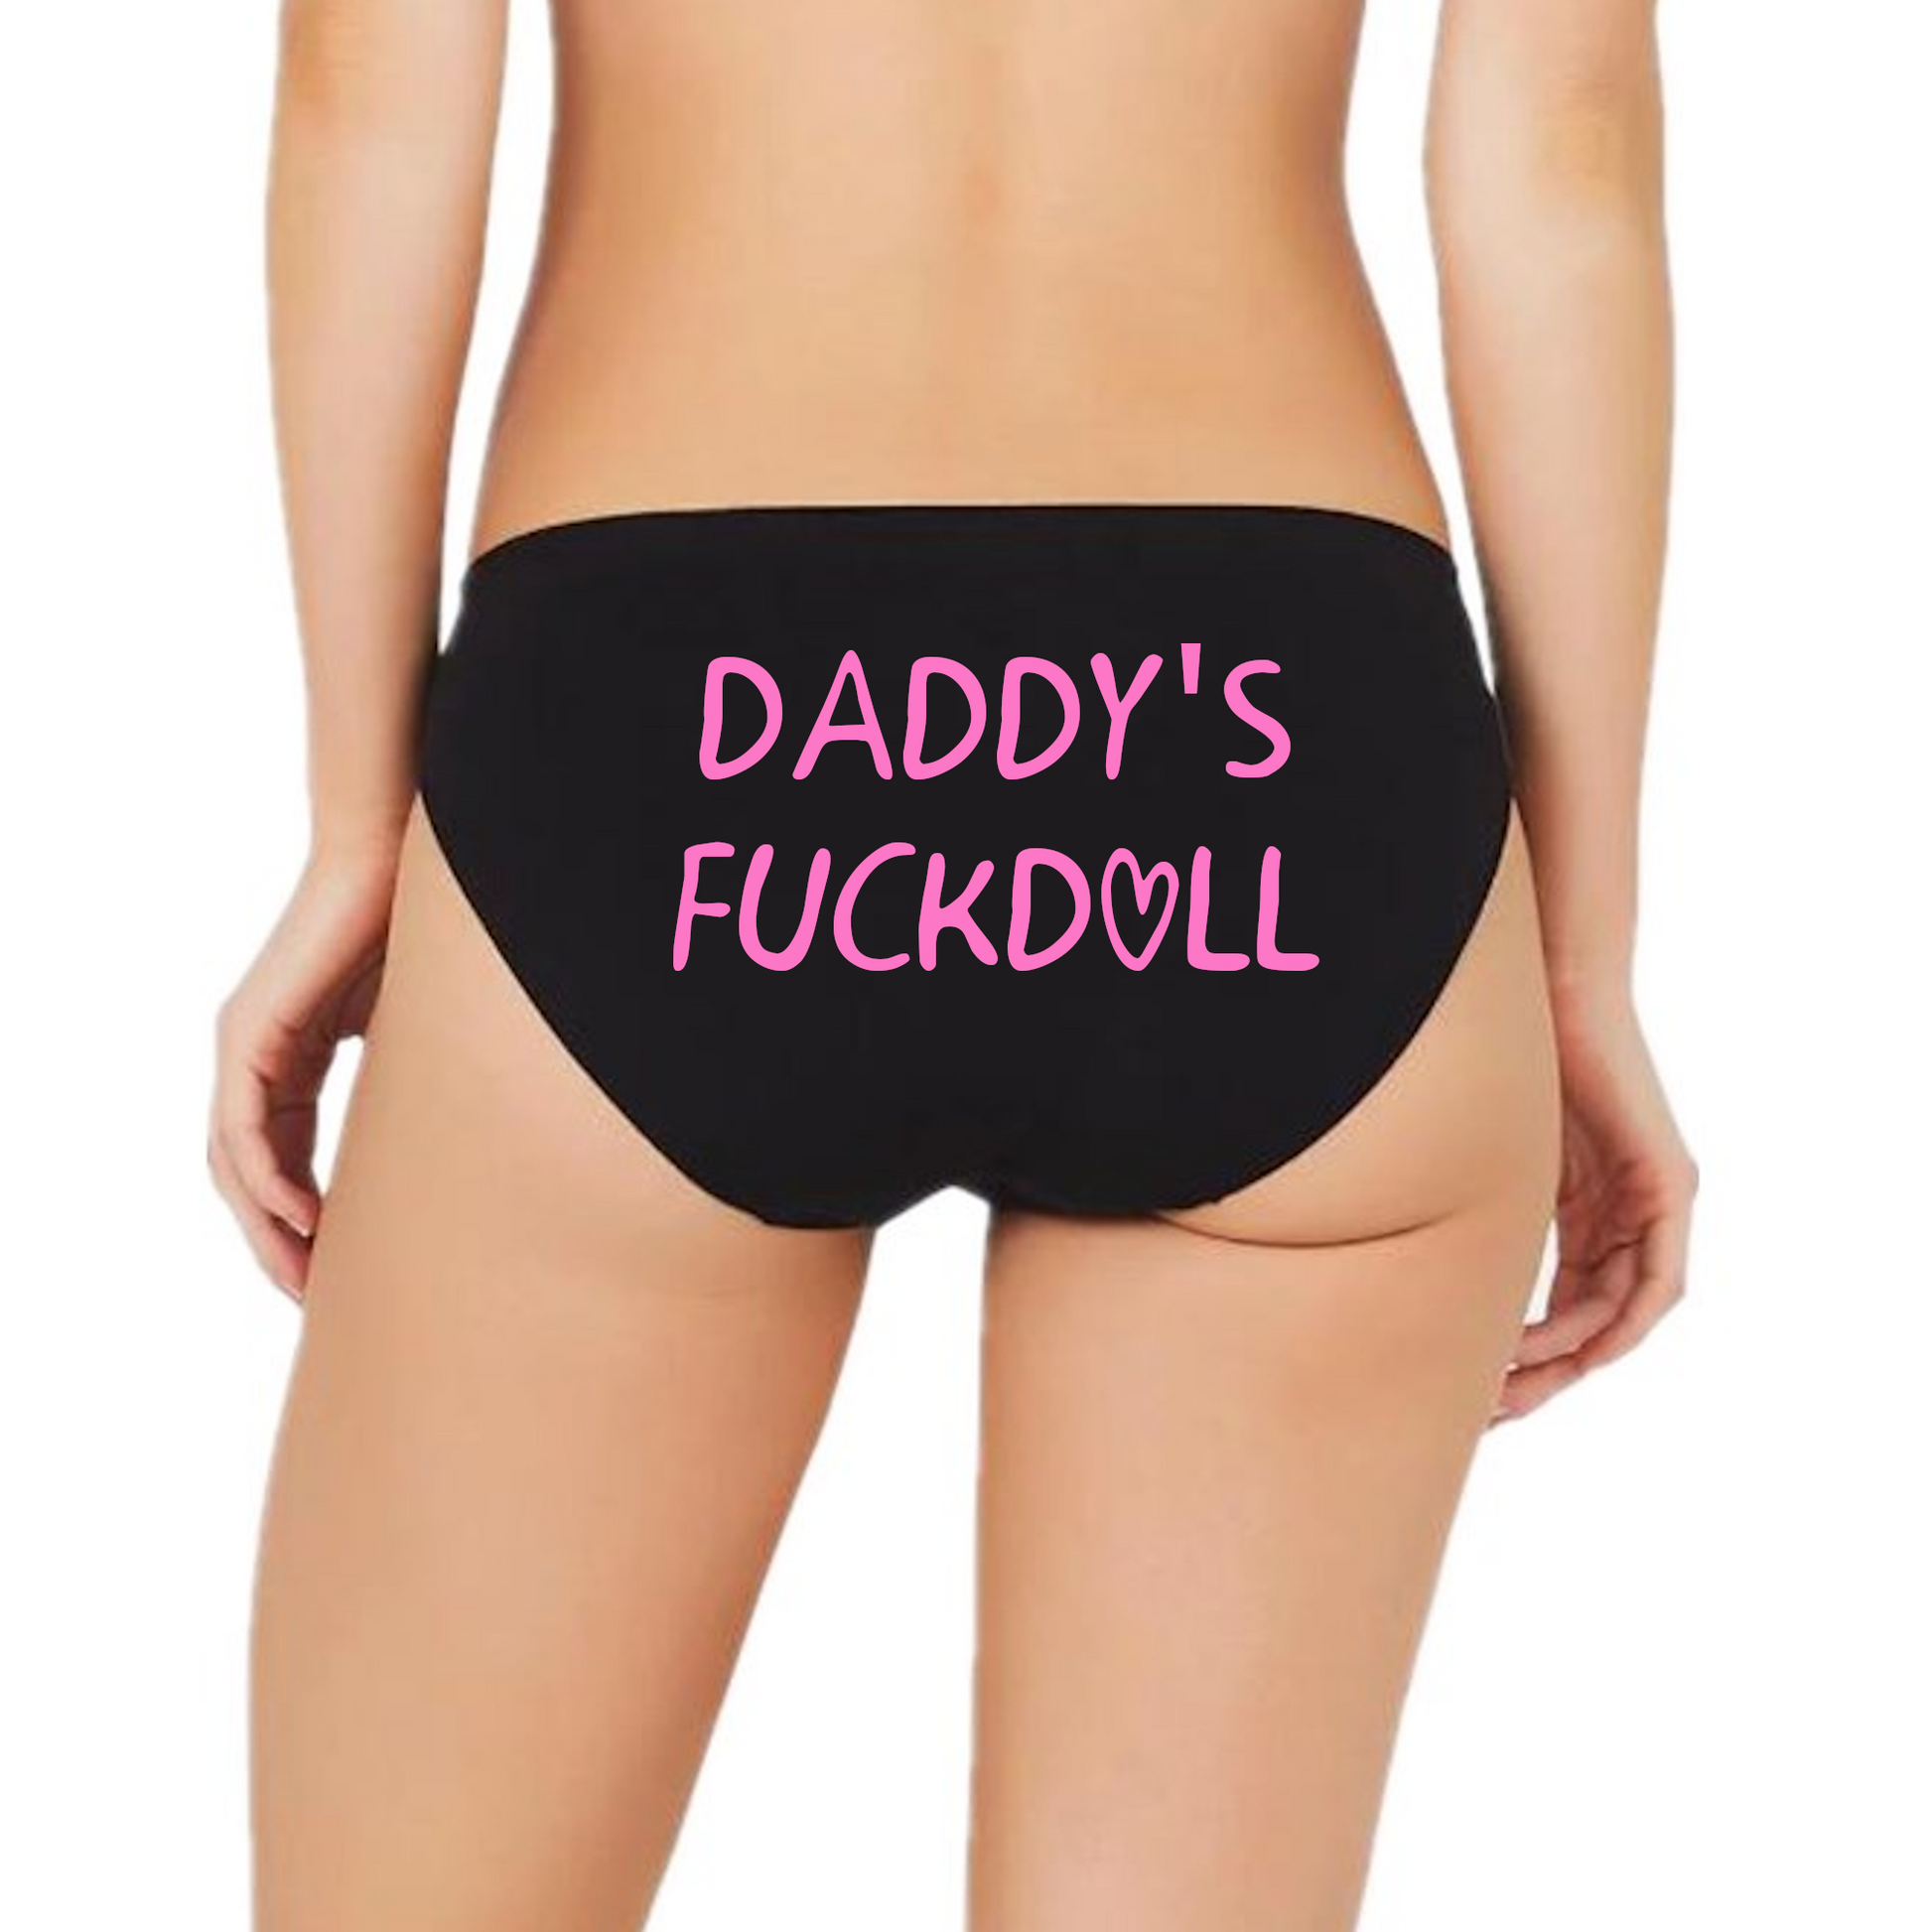 Daddys Fuckdoll Panties for DDLG Kink